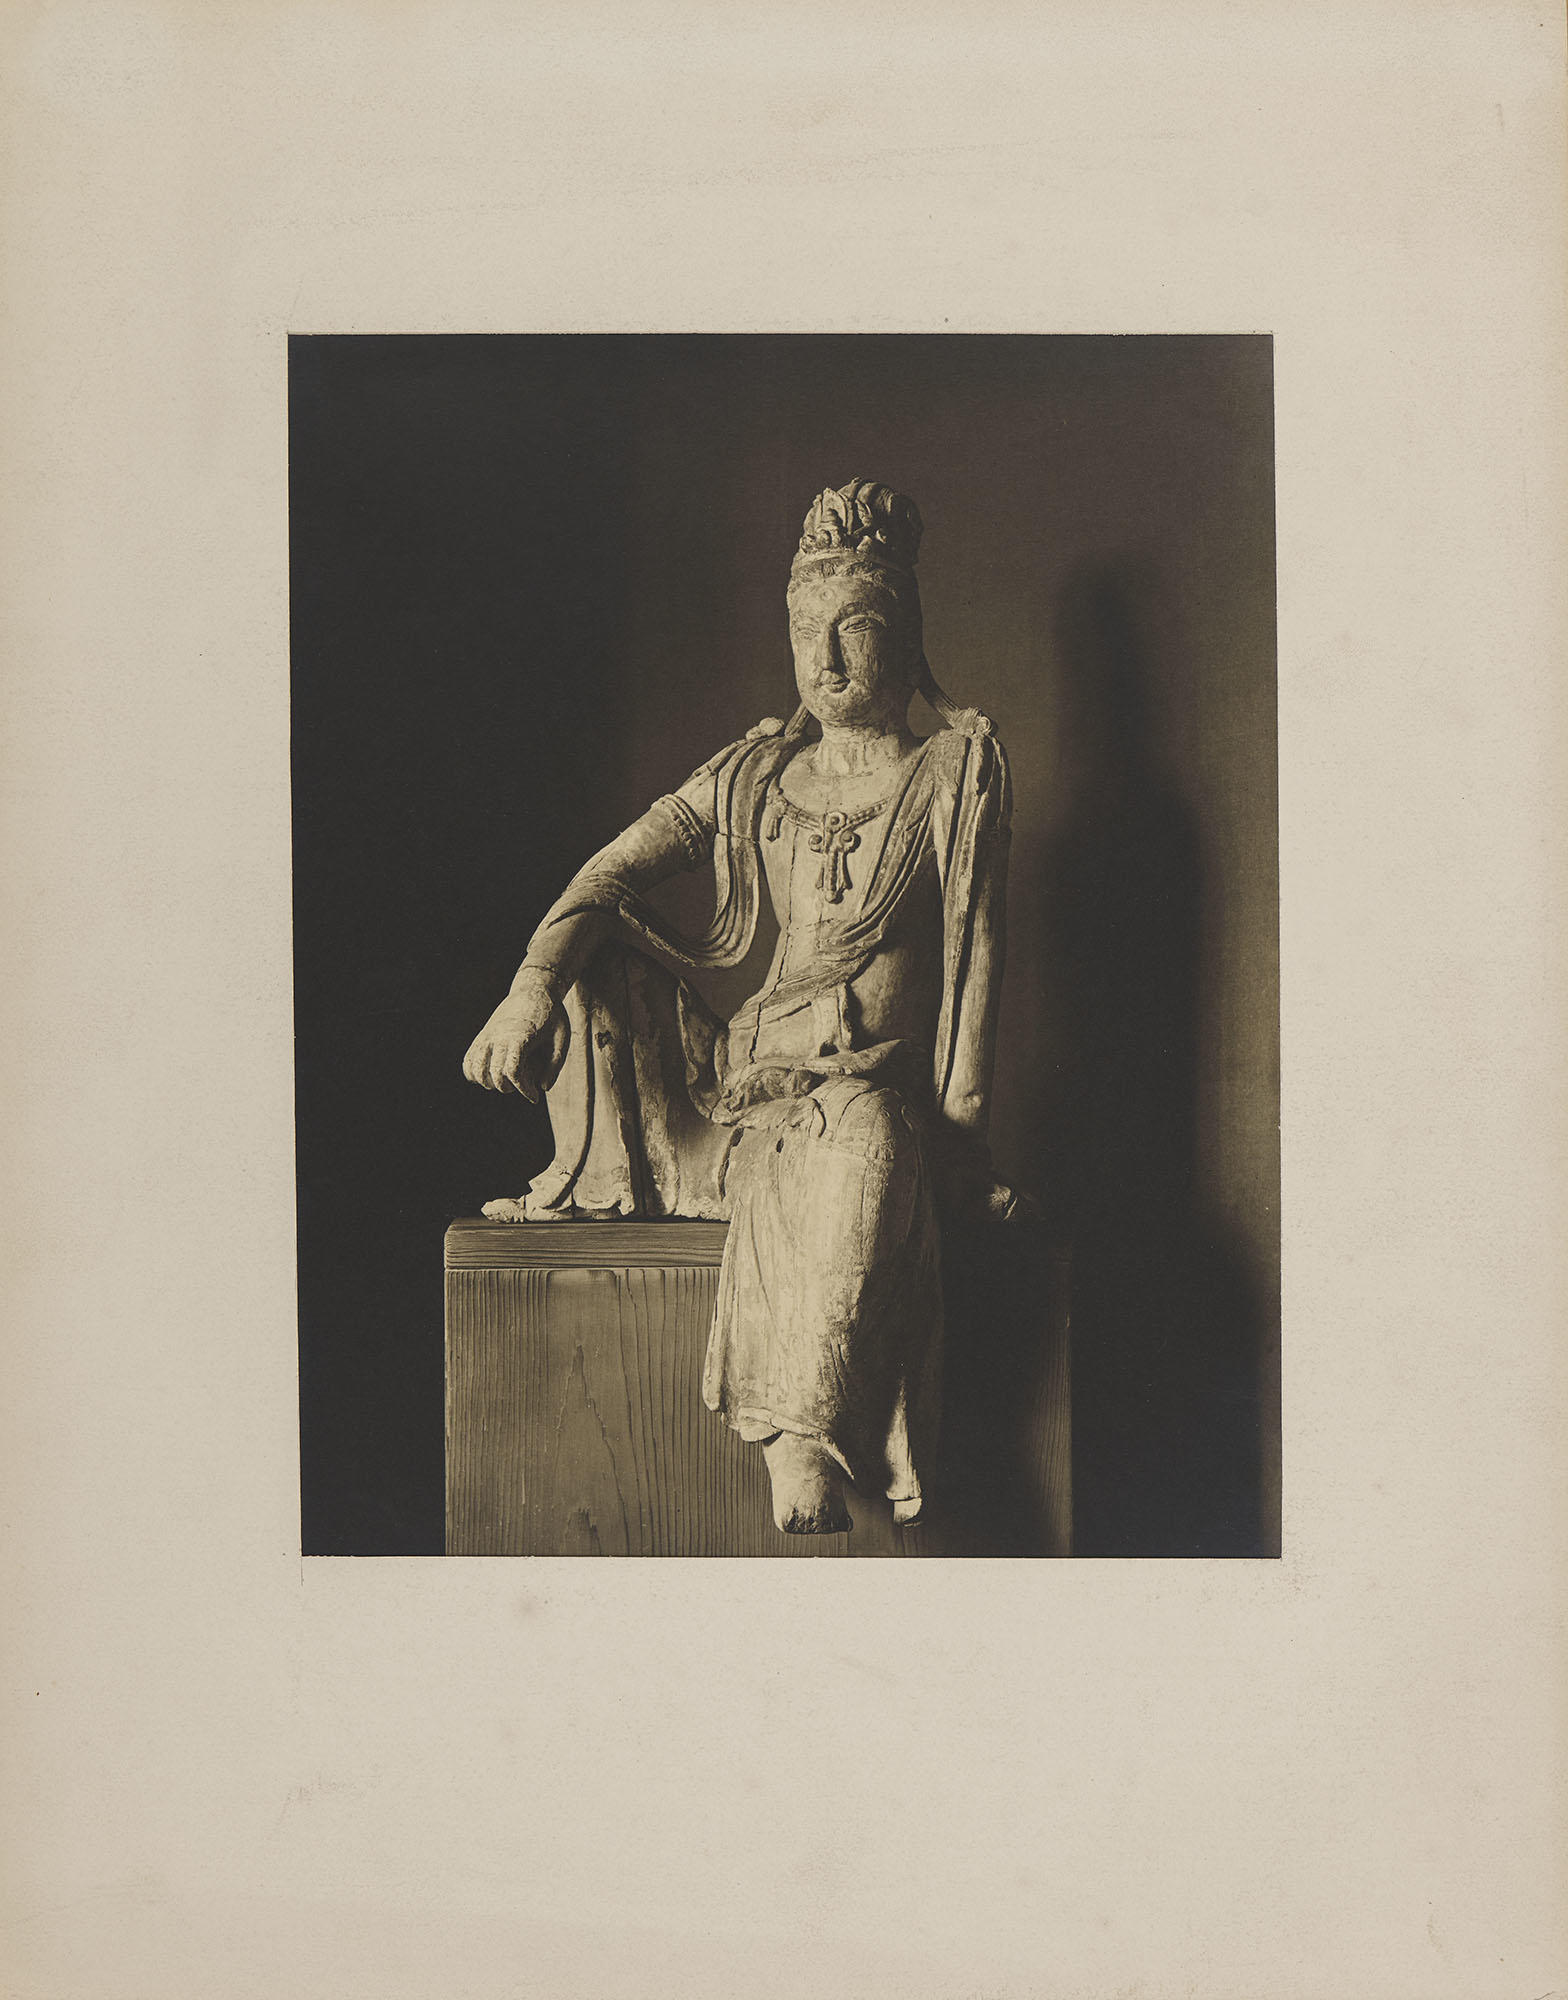 Black and white studio photograph of Guanyin sculpture sitting in the pose of Royal Ease,  mounted to board.